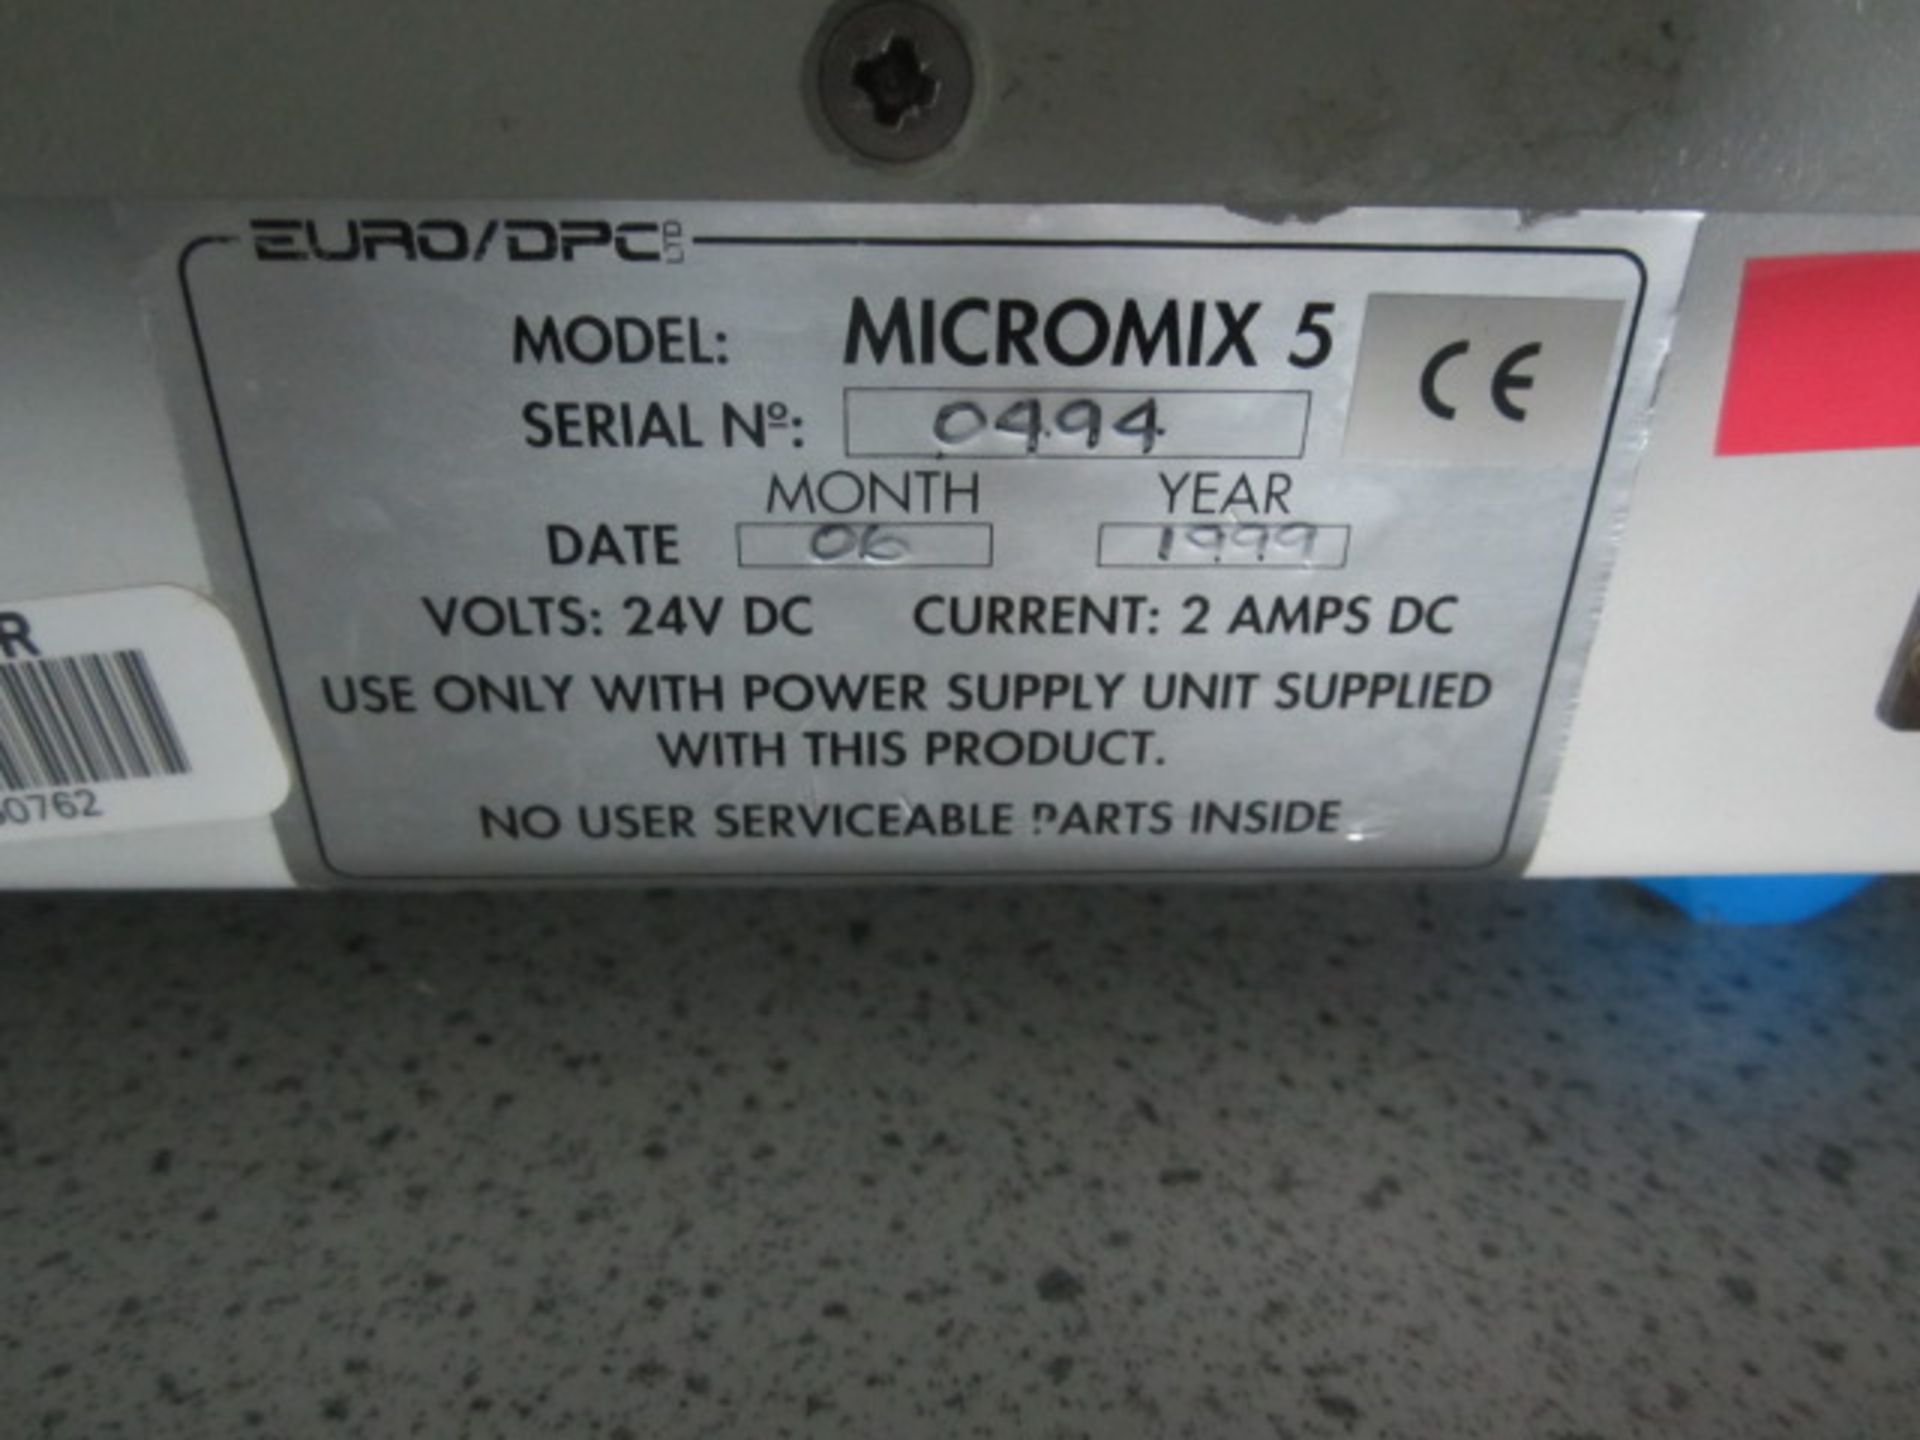 Euro Dpe MicroMix 5 mixer, serial number 0494 - Image 3 of 3